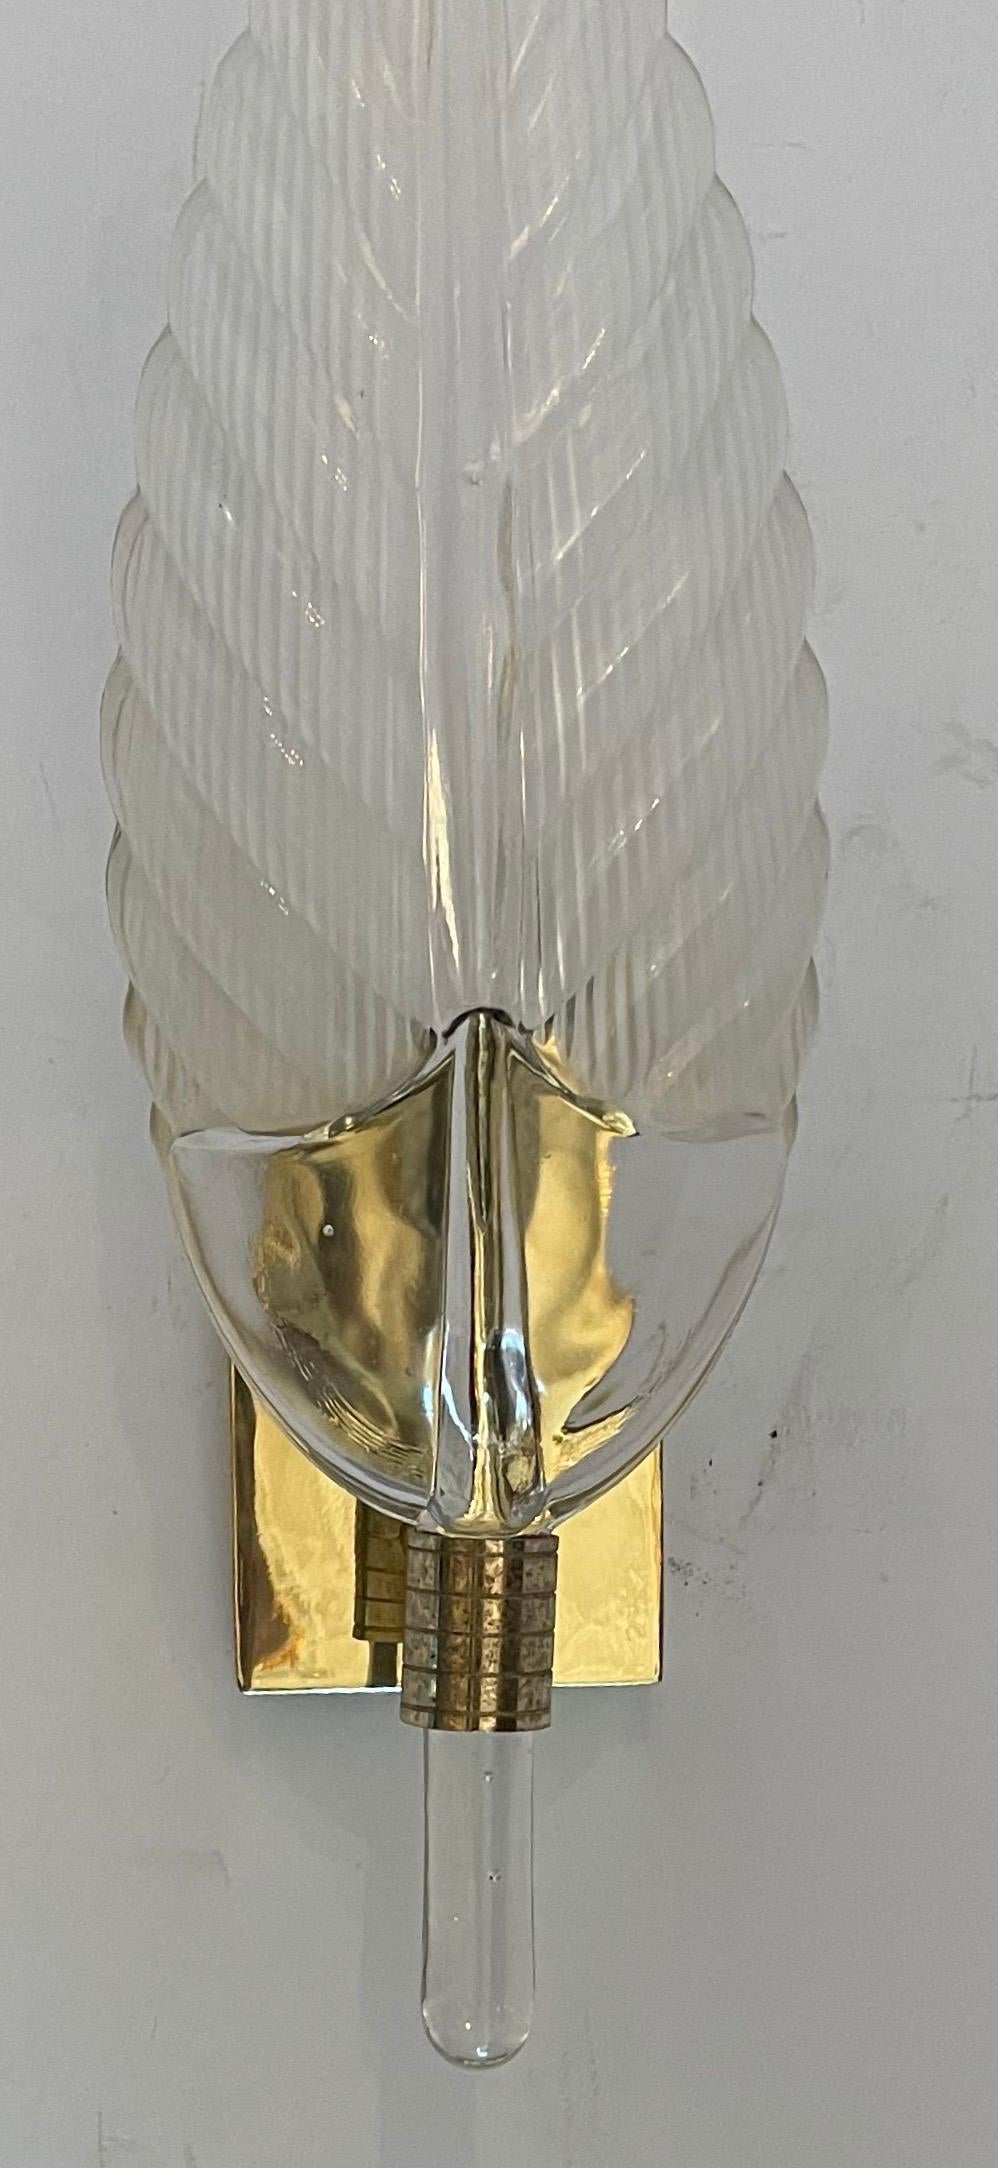 Fine Mid-Century Modern Polished Brass Murano Leaf Art Glass Seguso Pair Sconces In Good Condition For Sale In Roslyn, NY